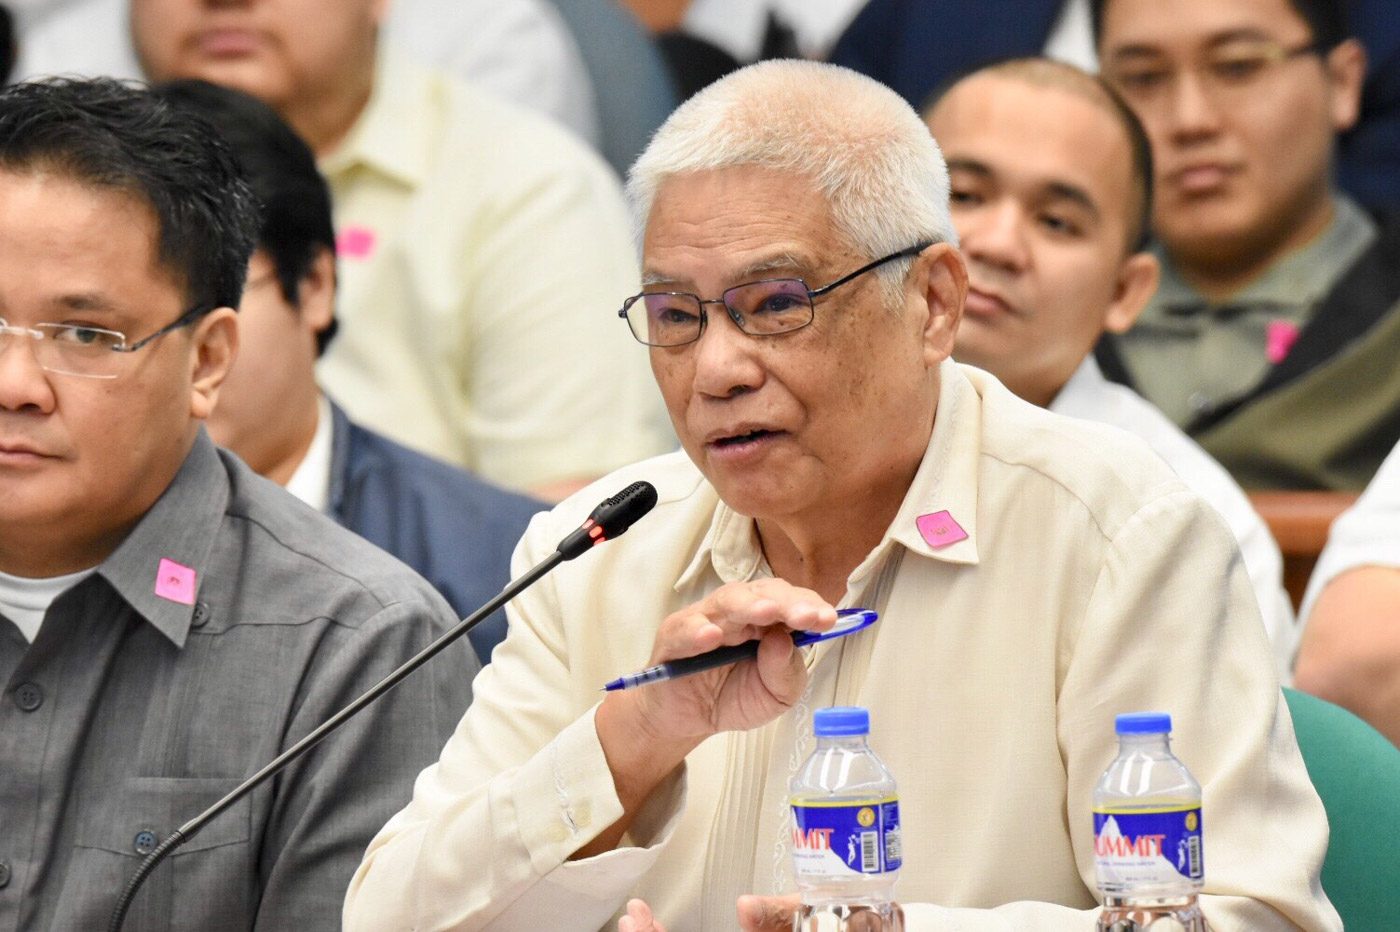 DICT Secretary Rio: Don’t replace me just yet